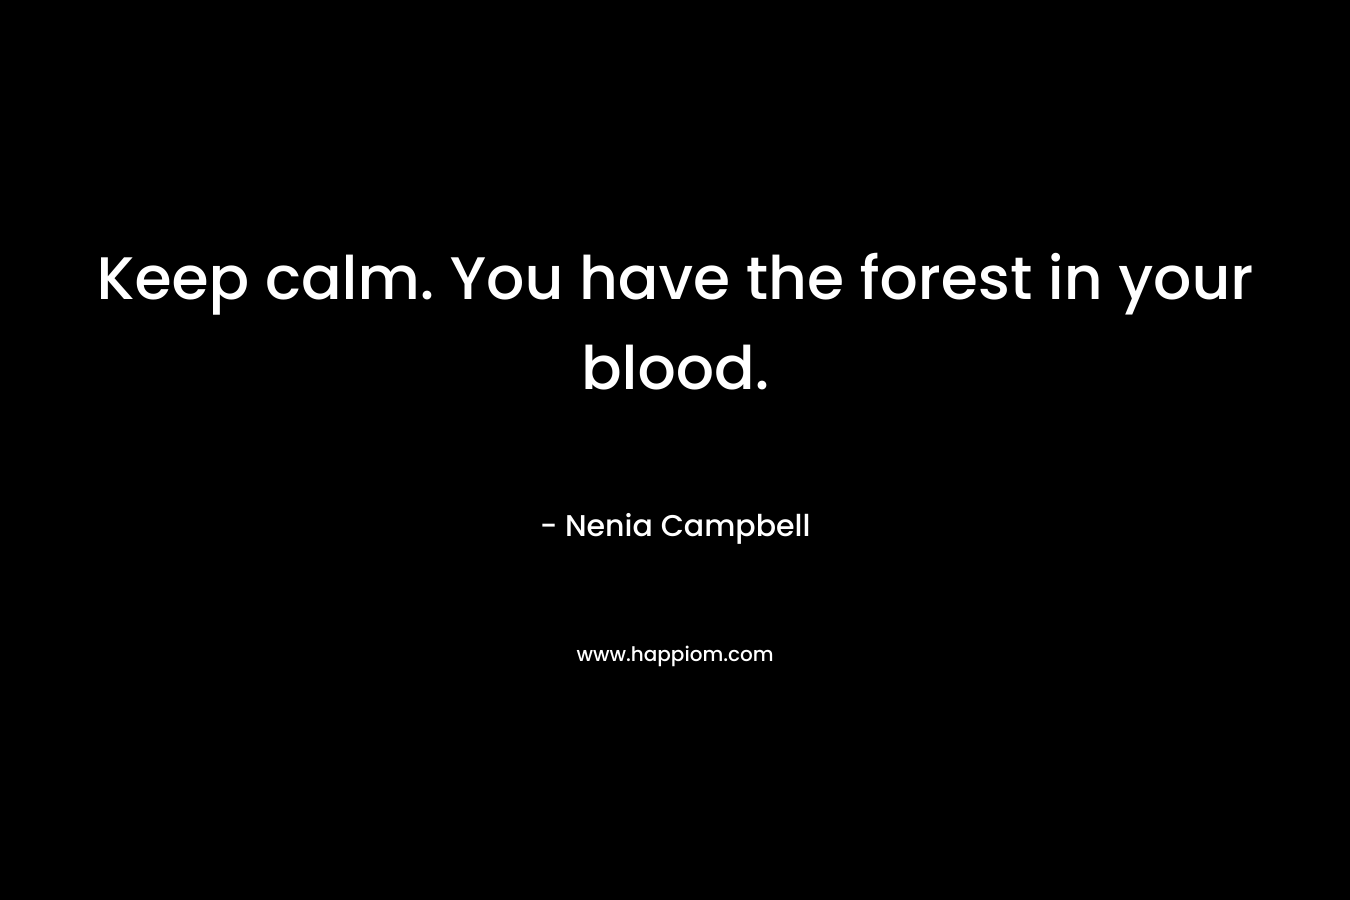 Keep calm. You have the forest in your blood.